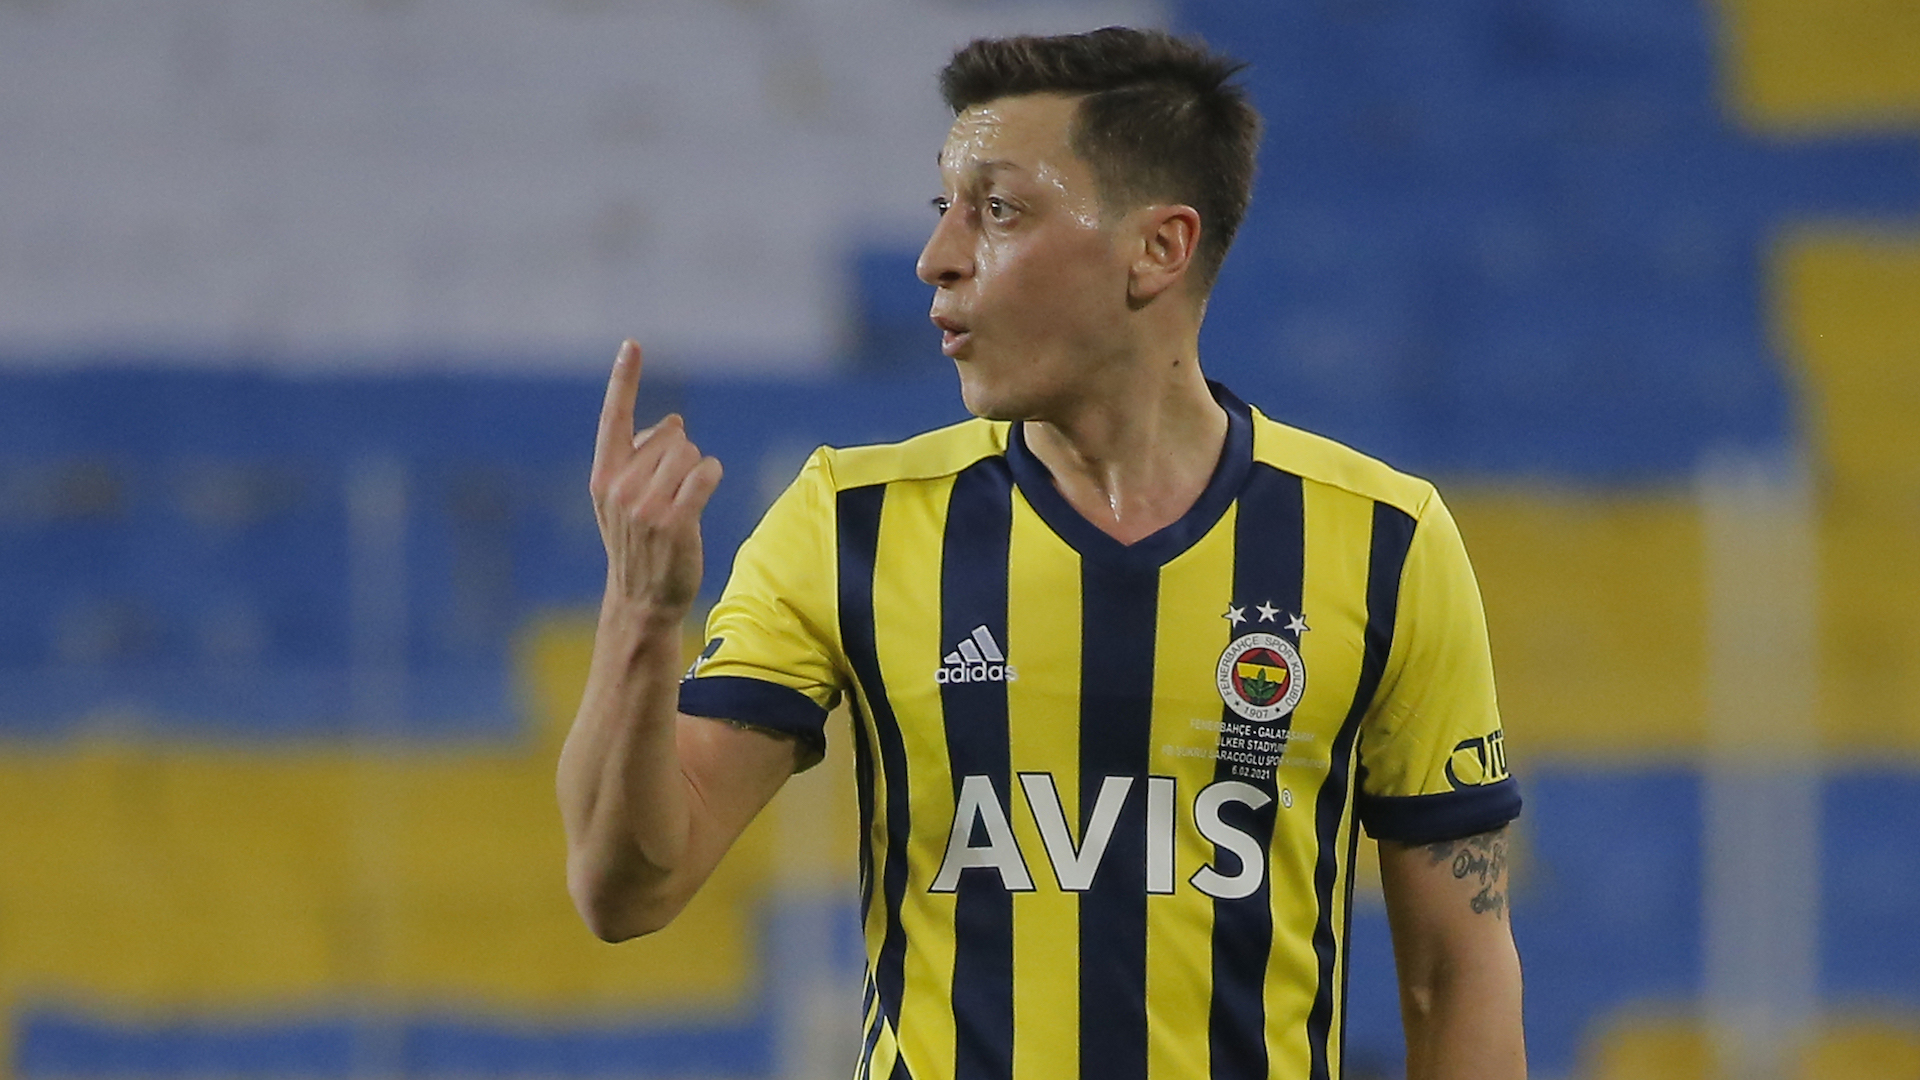 Mesut Ozil ends long goal drought with crucial strike for Turkish club Fenerbahce